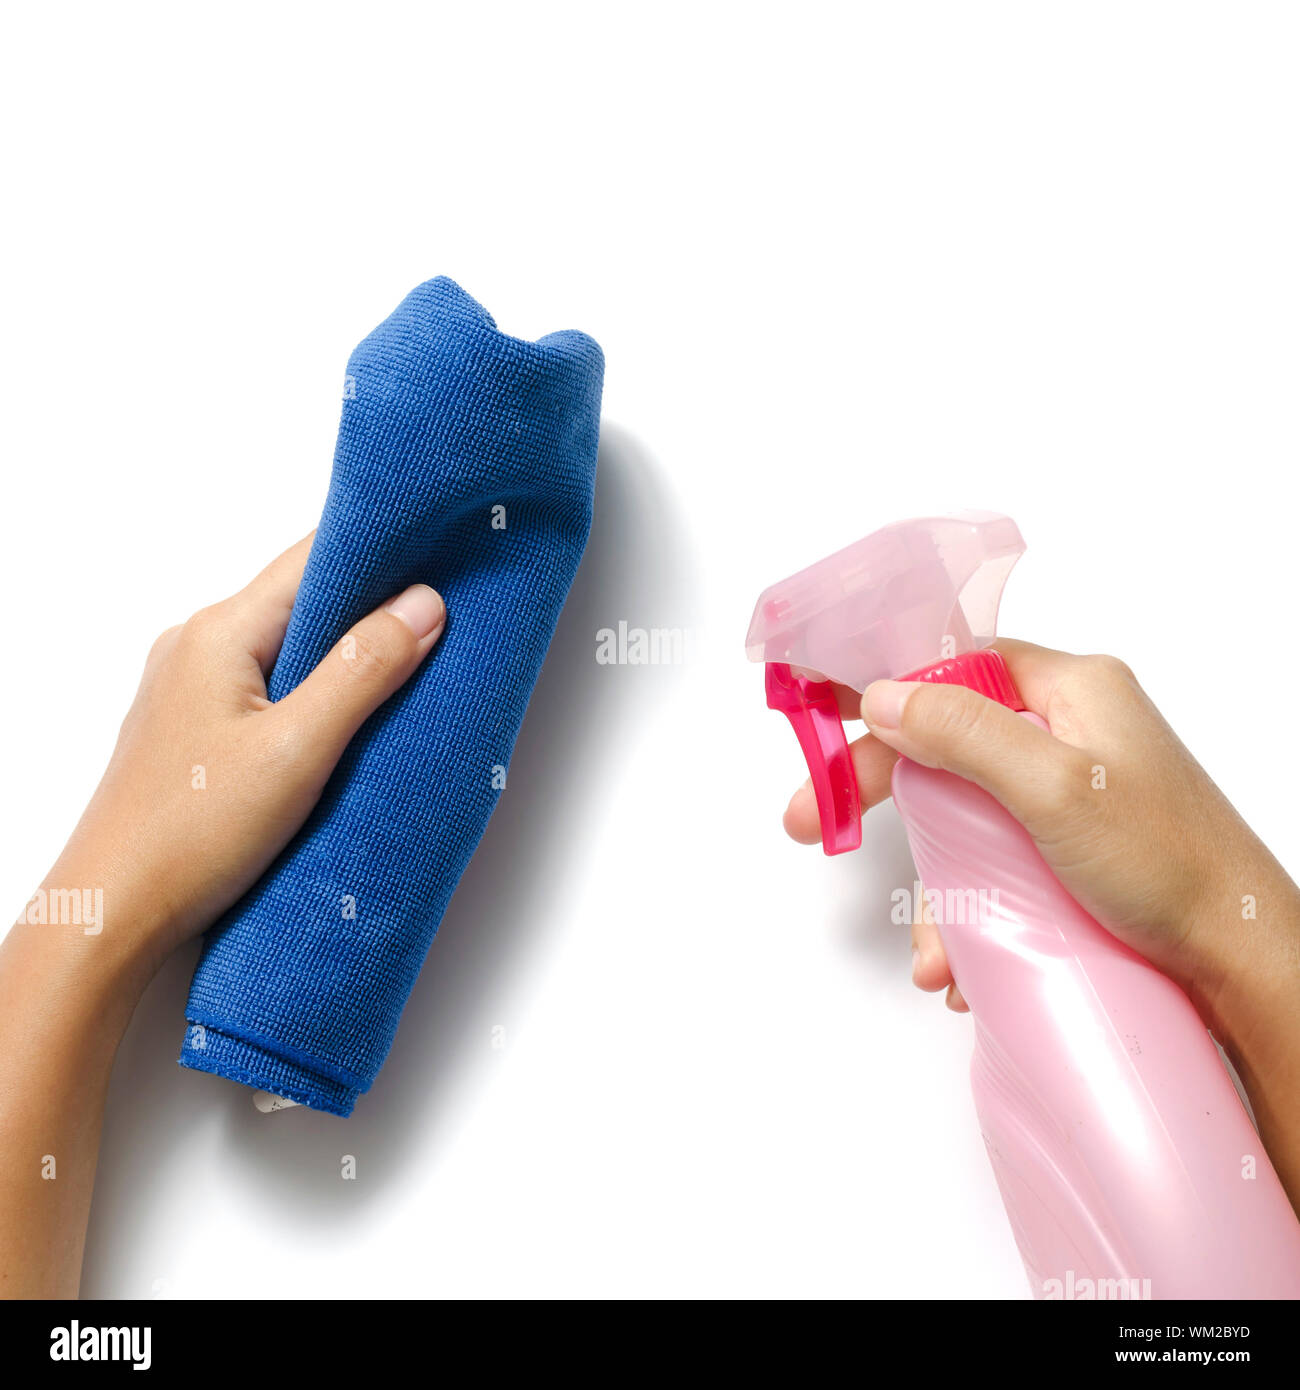 hand cleaning with spray bottle and blue rag Stock Photo